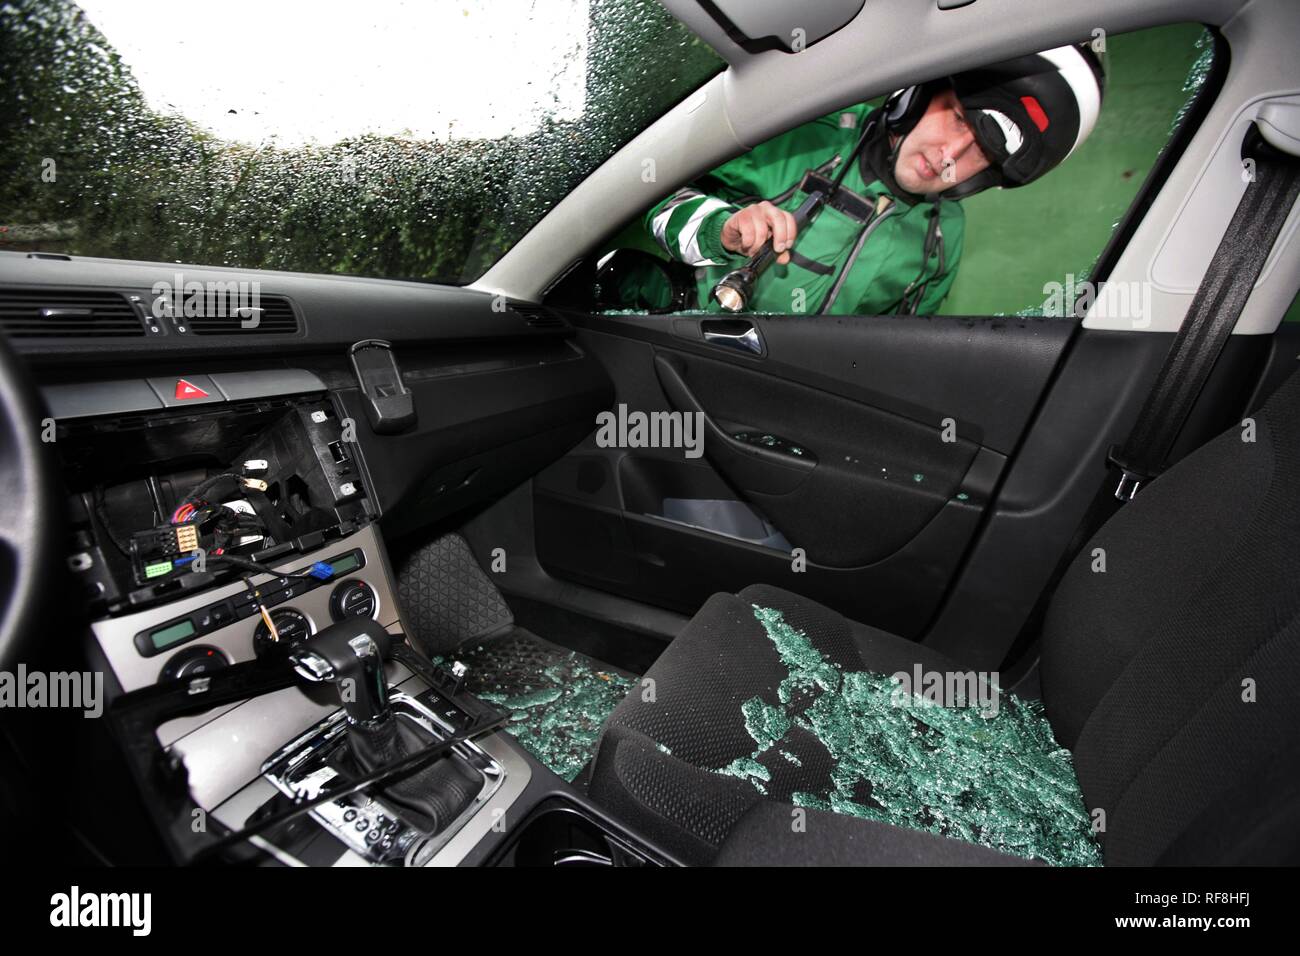 Police officer inspecting a car broken into by thieves who have stolen a radio and navigation system, Essen Stock Photo